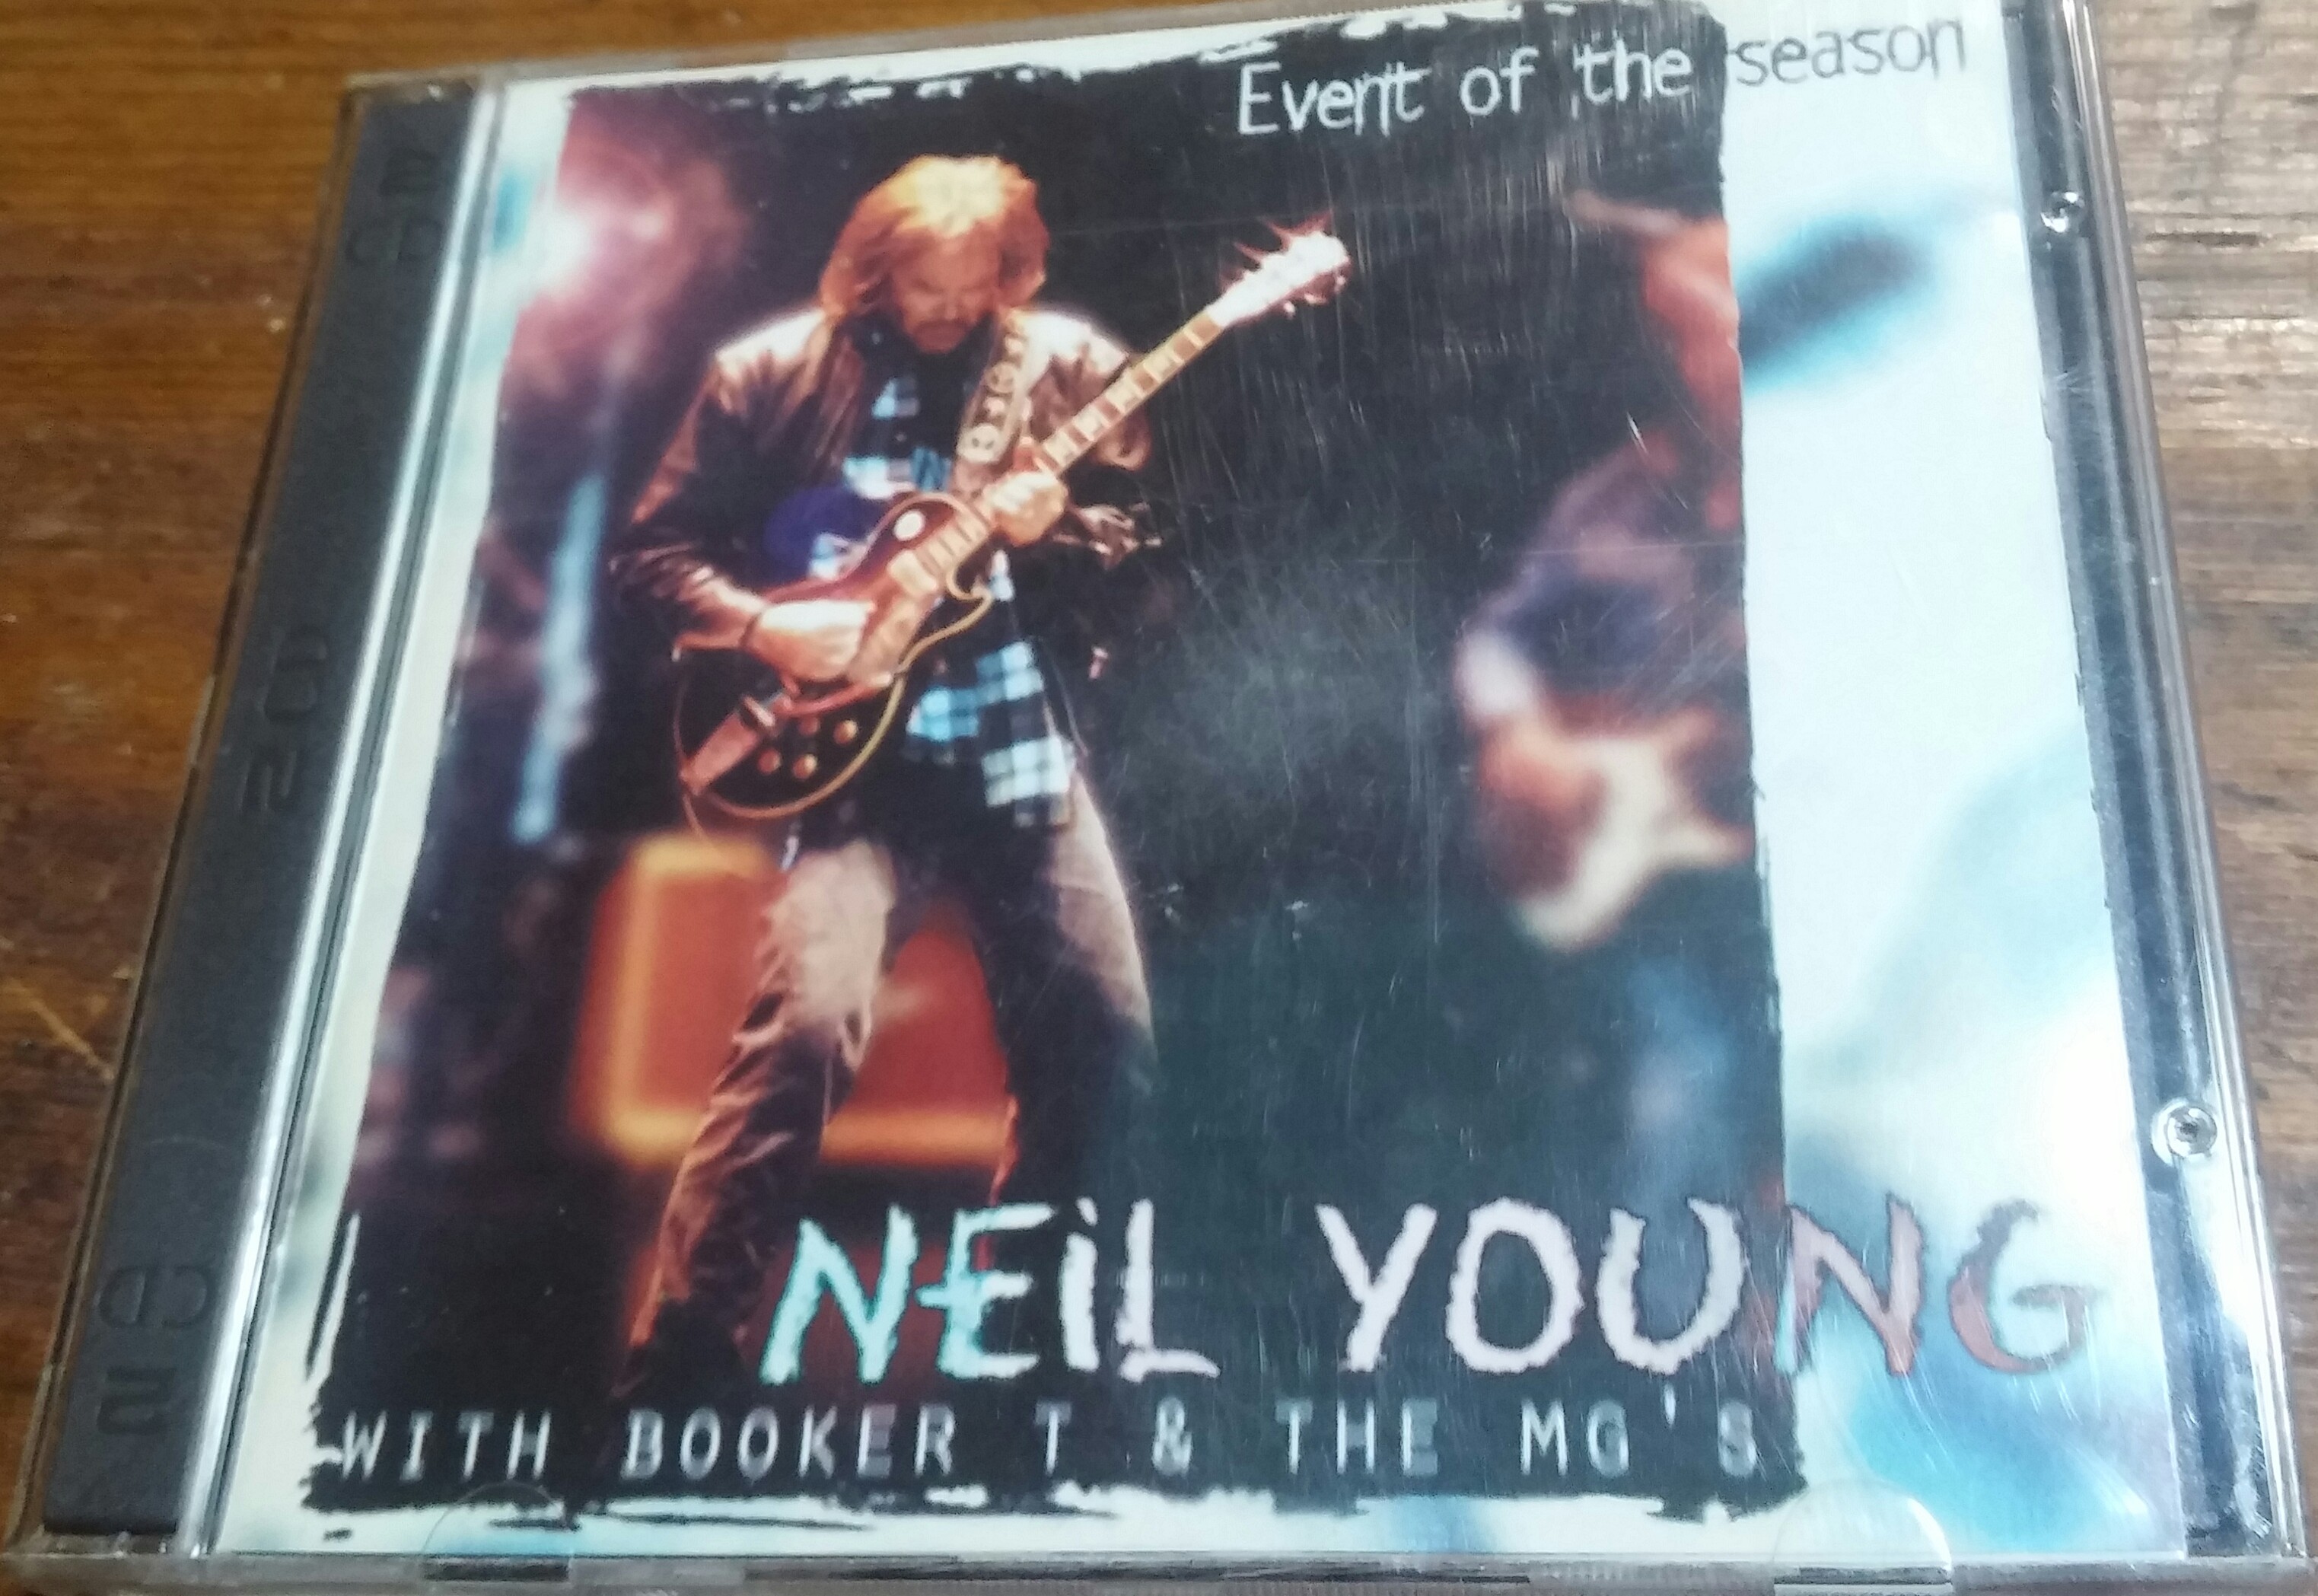 Neil Young - Event of the season (with Booker T & the MG's)